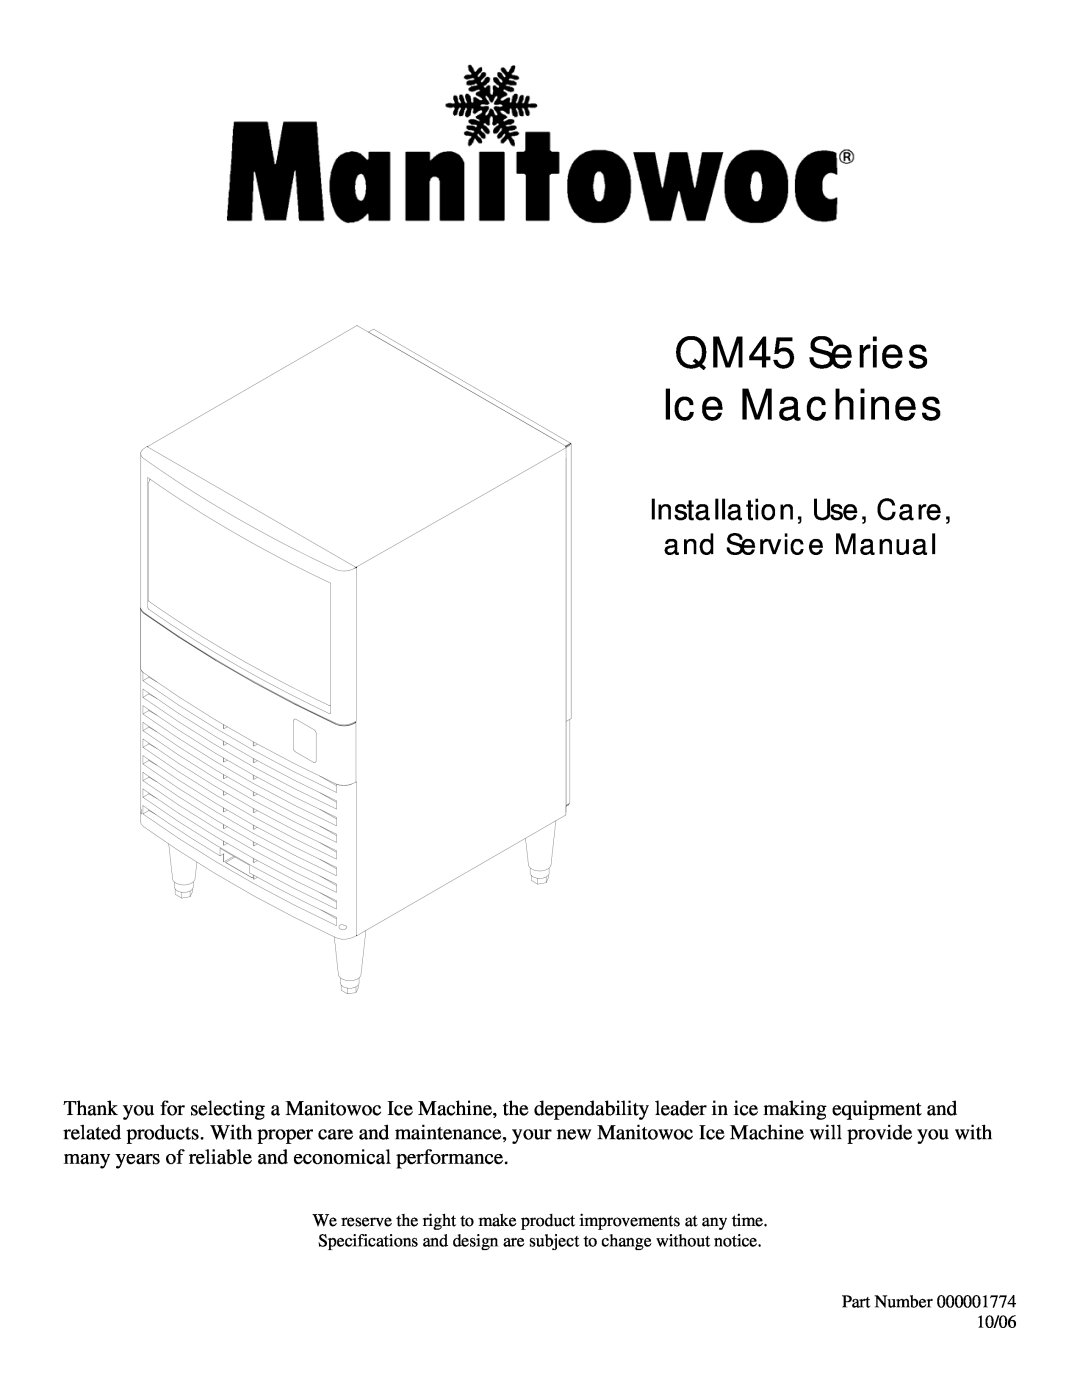 Manitowoc Ice service manual Installation, Use, Care and Service Manual, QM45 Series Ice Machines 